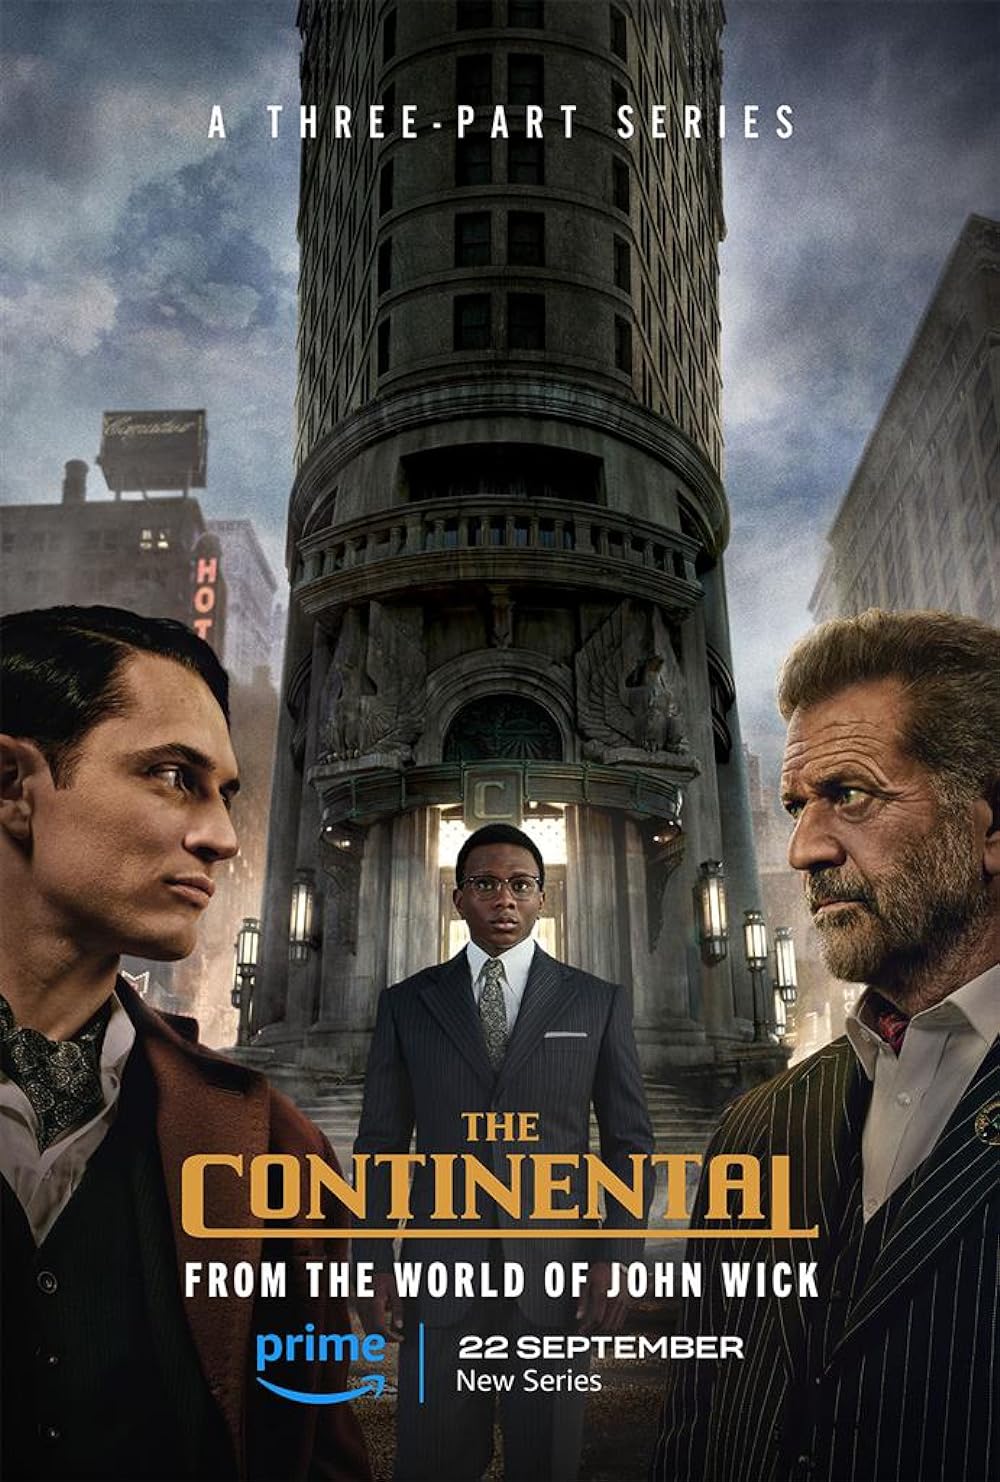 The Continental: From the World of John Wick (2023) S1 EP01&EP03 640Kbps 23.976Fps 48Khz 5.1Ch DD+ AMZN E-AC3 Turkish Audio TAC